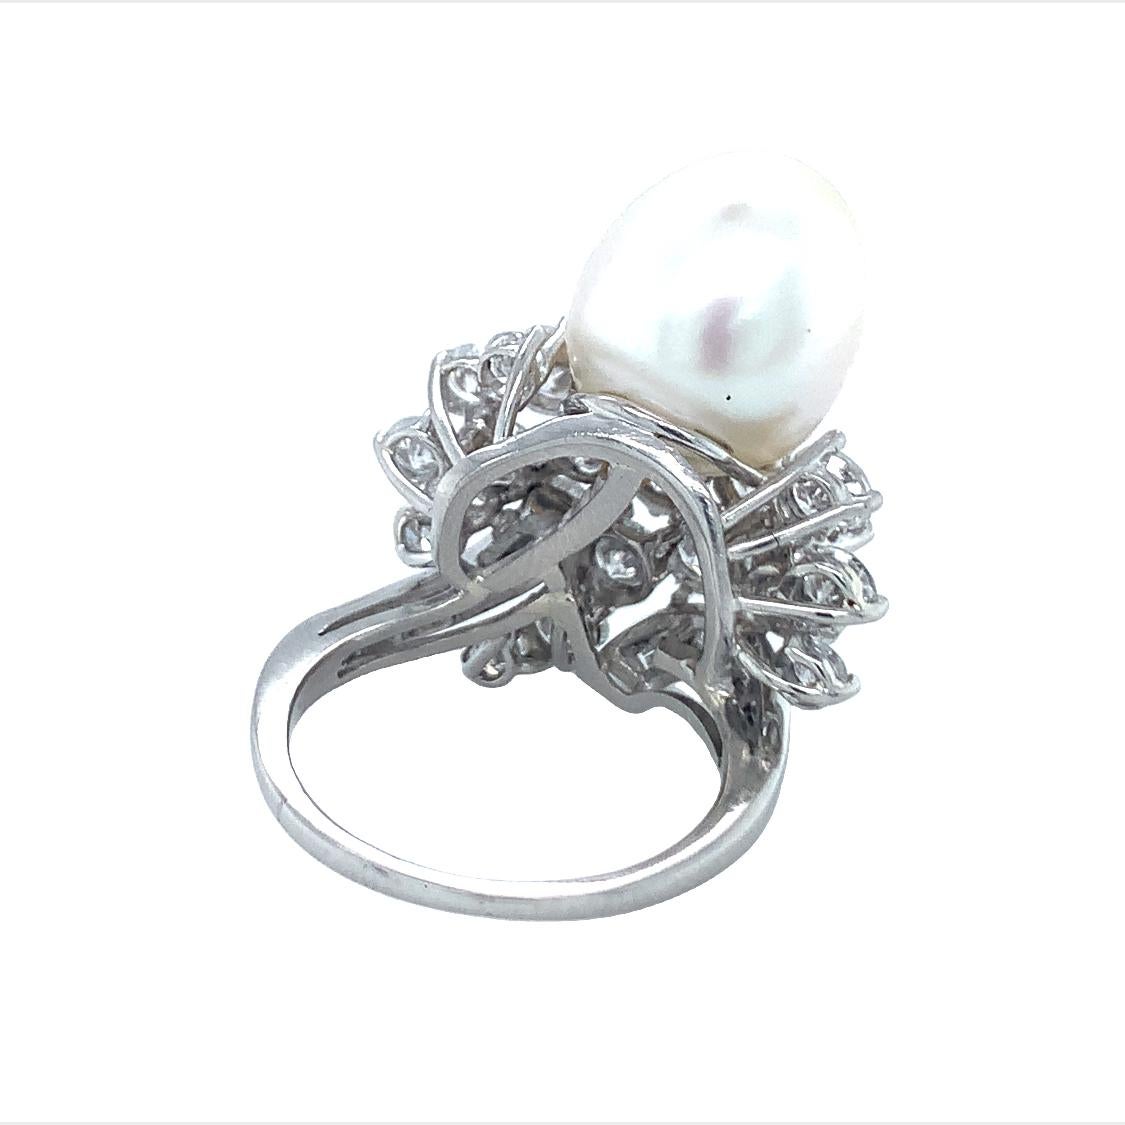 One Mid-Century South Sea pearl and diamond platinum ring featuring one oval shaped, white South Sea pearl measuring 12 millimeters in diameter. The ring is enhanced by 30 round brilliant and straight baguette cut diamonds weighing a total of 4.95